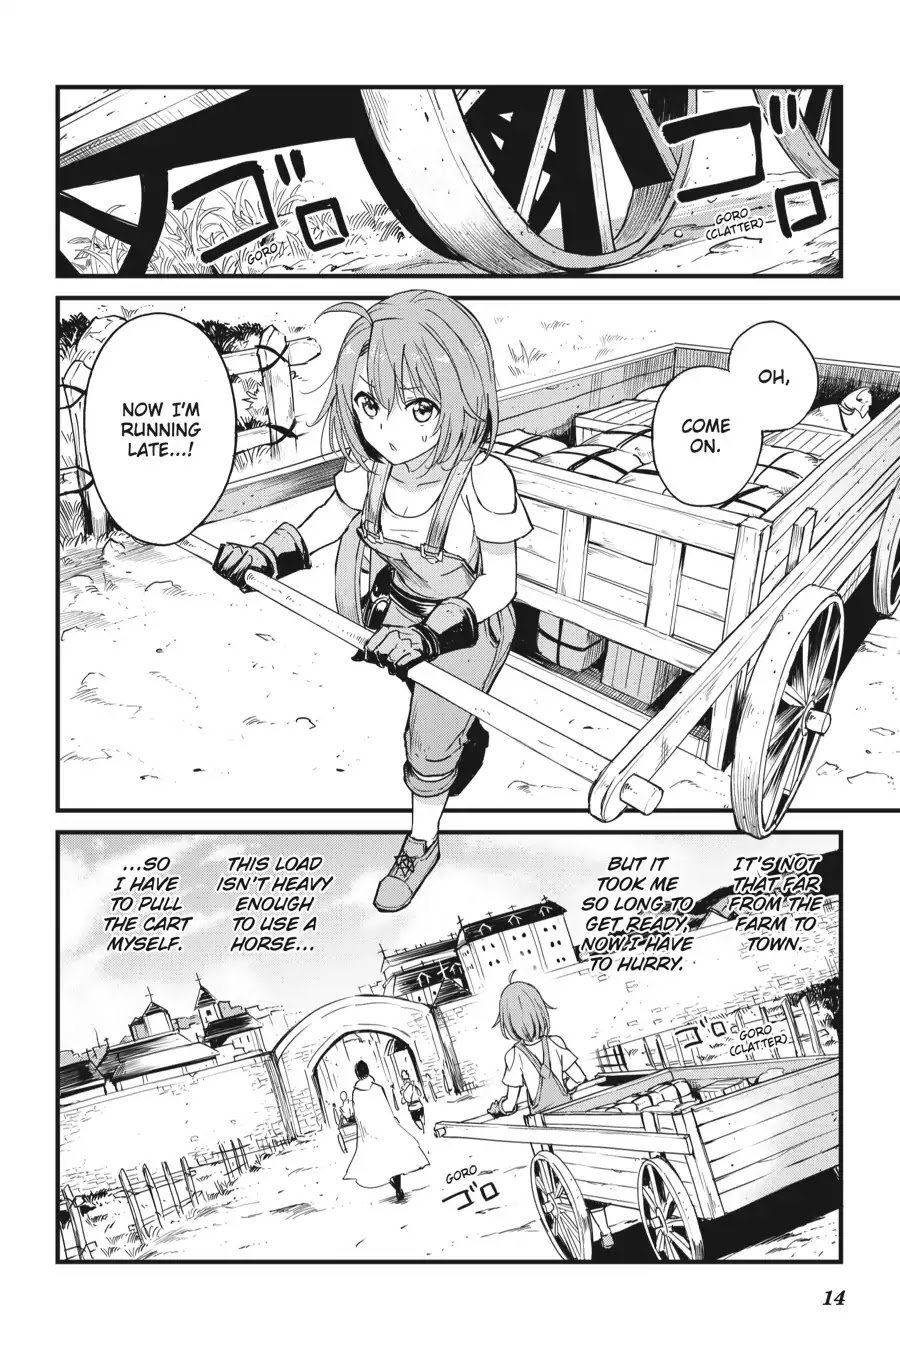 Goblin Slayer: Side Story Year One chapter 32 page 14